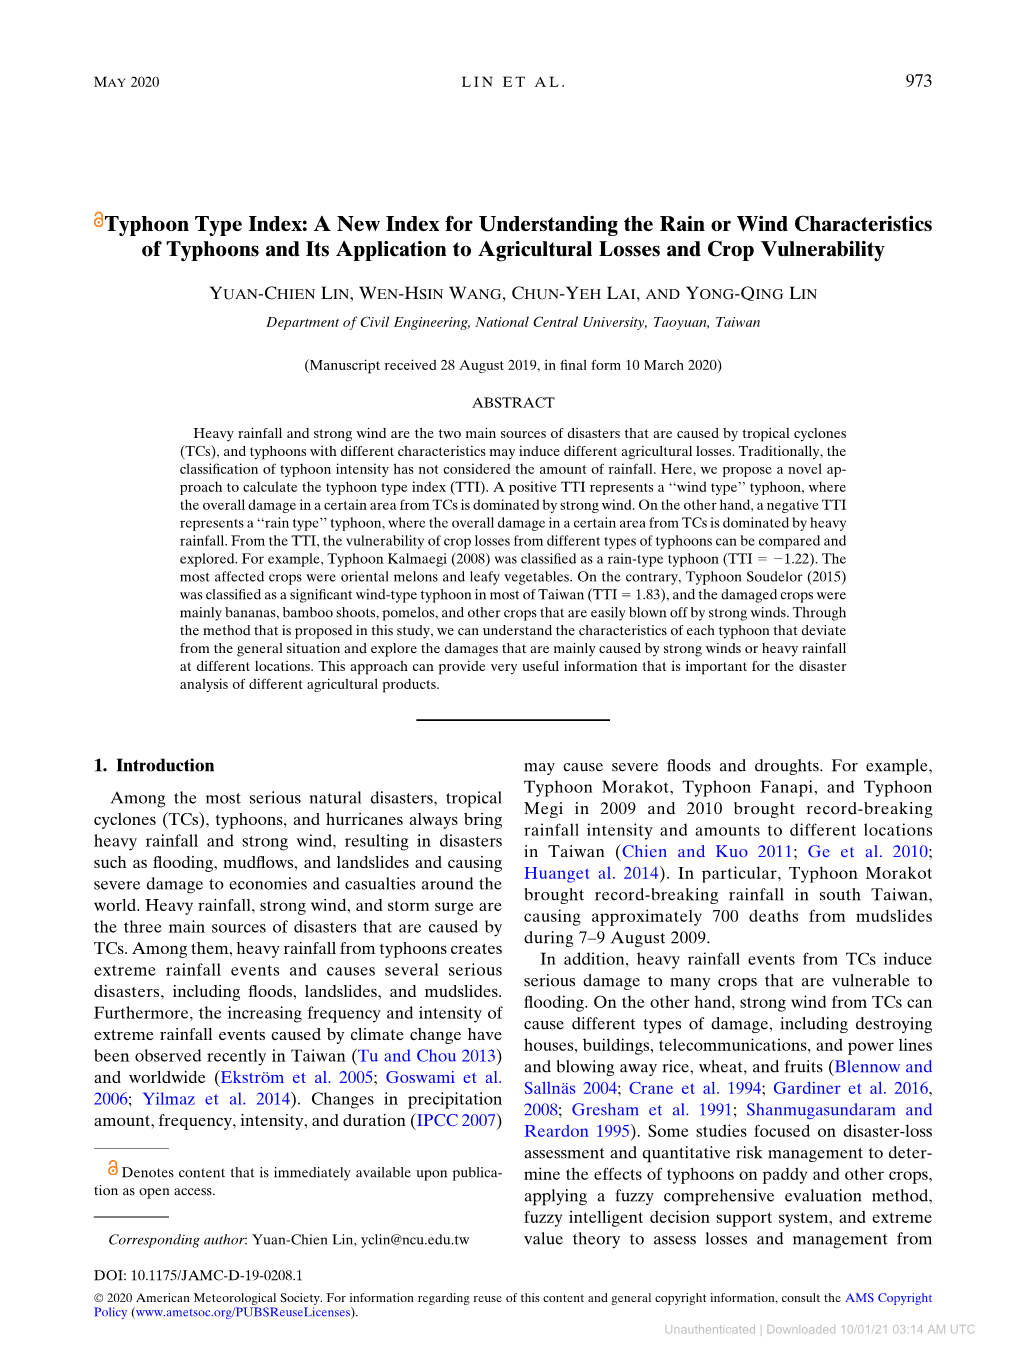 Typhoon Type Index: a New Index for Understanding the Rain Or Wind Characteristics of Typhoons and Its Application to Agricultural Losses and Crop Vulnerability